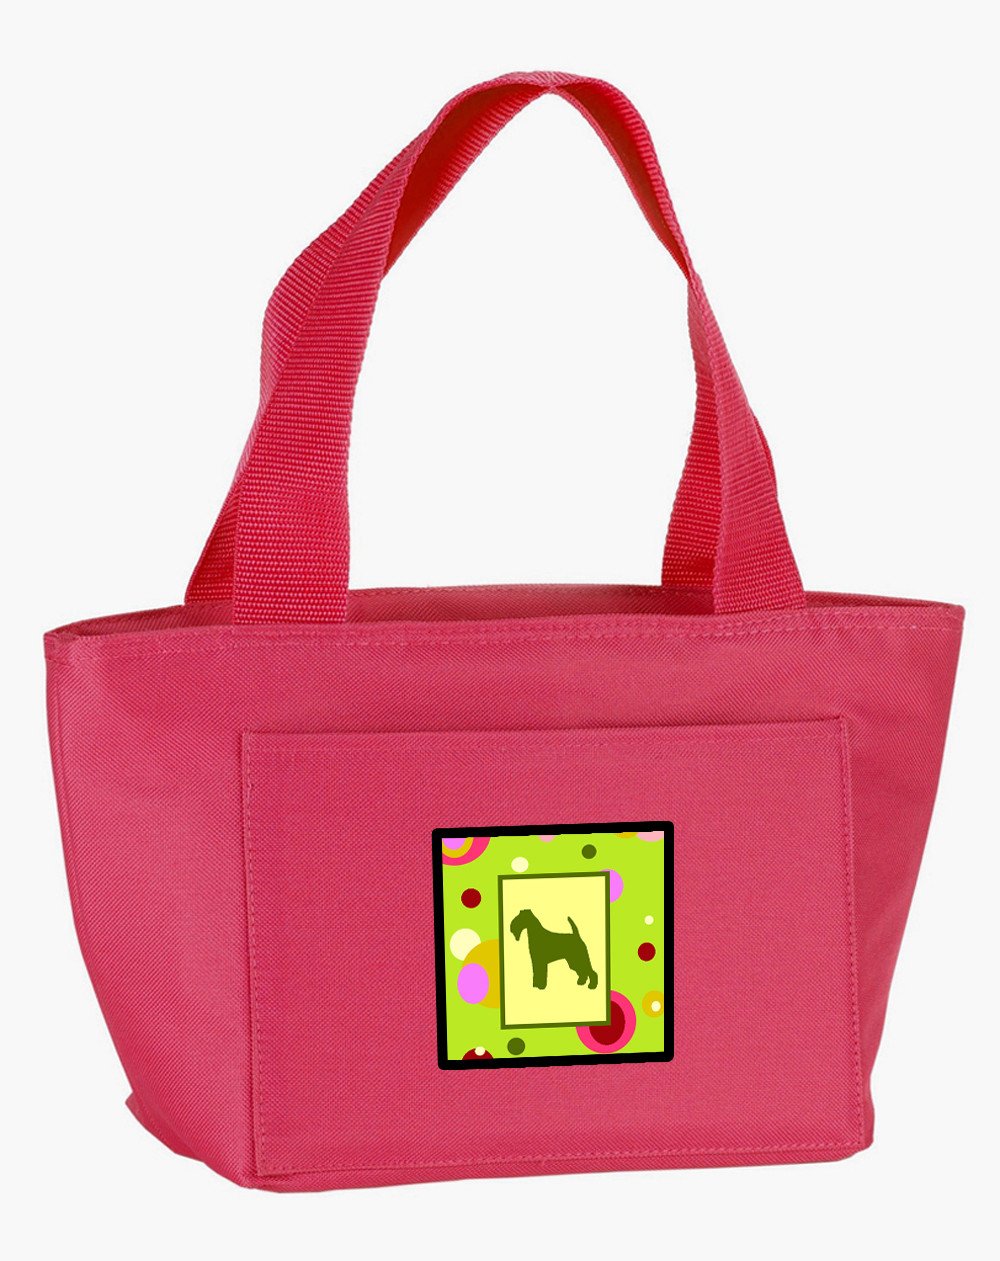 Lime Green Dots Welsh Terrier  Lunch Bag CK1069PK-8808 by Caroline's Treasures